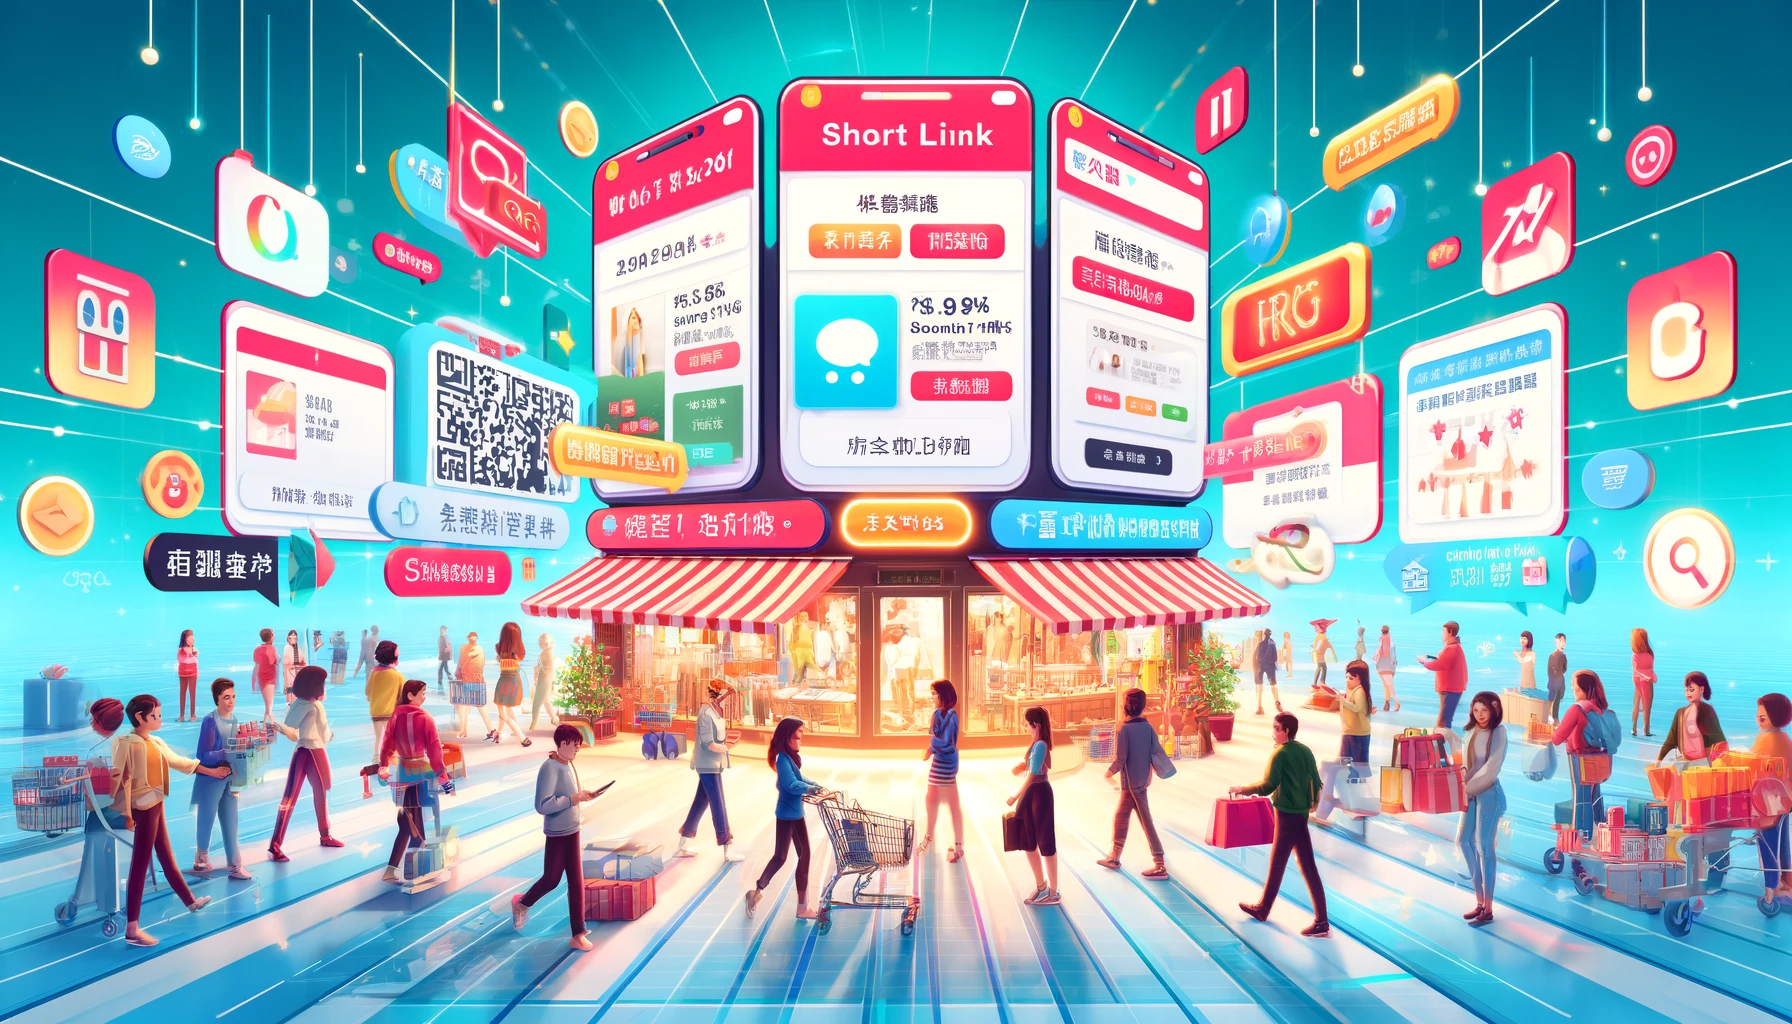 A vibrant and busy online shopping scene on the Tmall platform. Display a variety of product listings with short links prominently shown, highlighting their ease of sharing. Illustrate consumers easily accessing and sharing these links on social media platforms like WeChat and Weibo. Include elements that show the simplicity and efficiency of using short links for promotions, such as a promotional banner with a short link and a user scanning a QR code leading to a short link. The overall atmosphere should be dynamic and modern, reflecting the high-energy nature of online shopping.